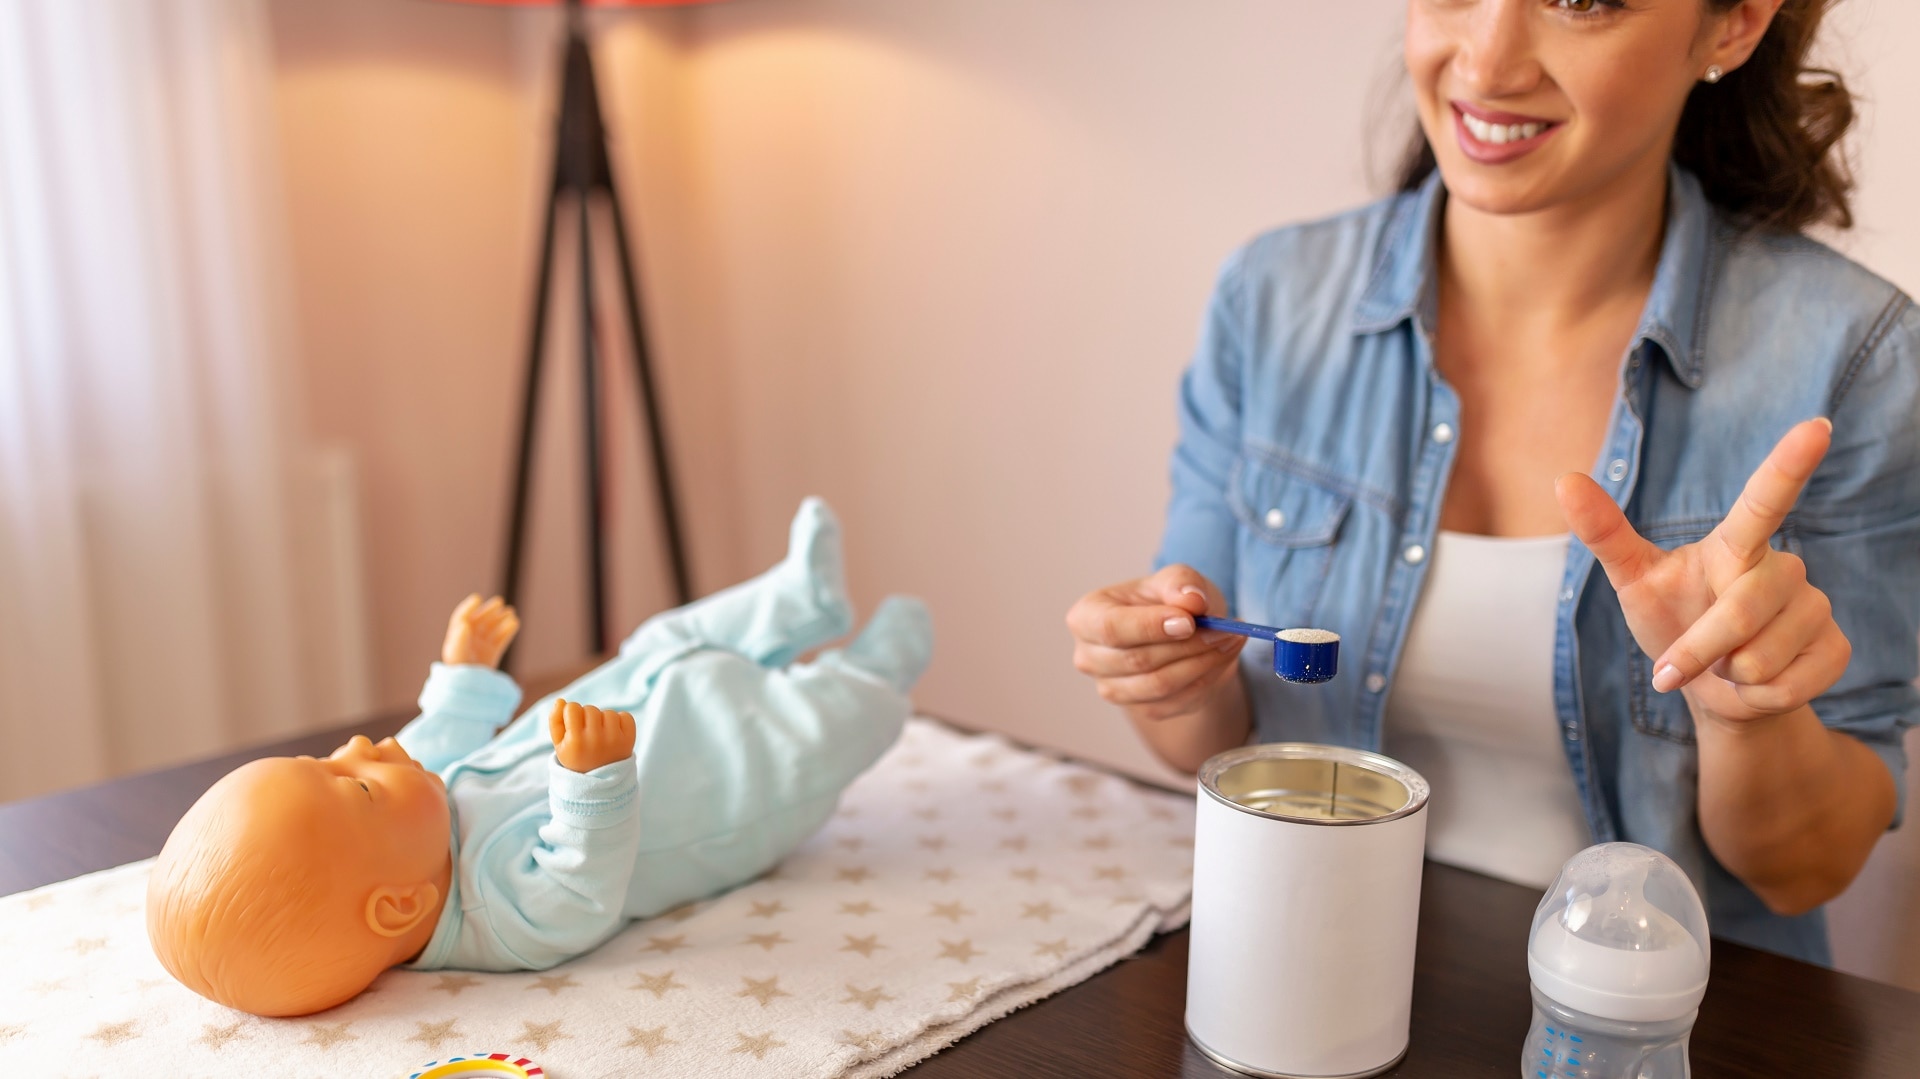 Woman sitting behind a baby doll laying on a table